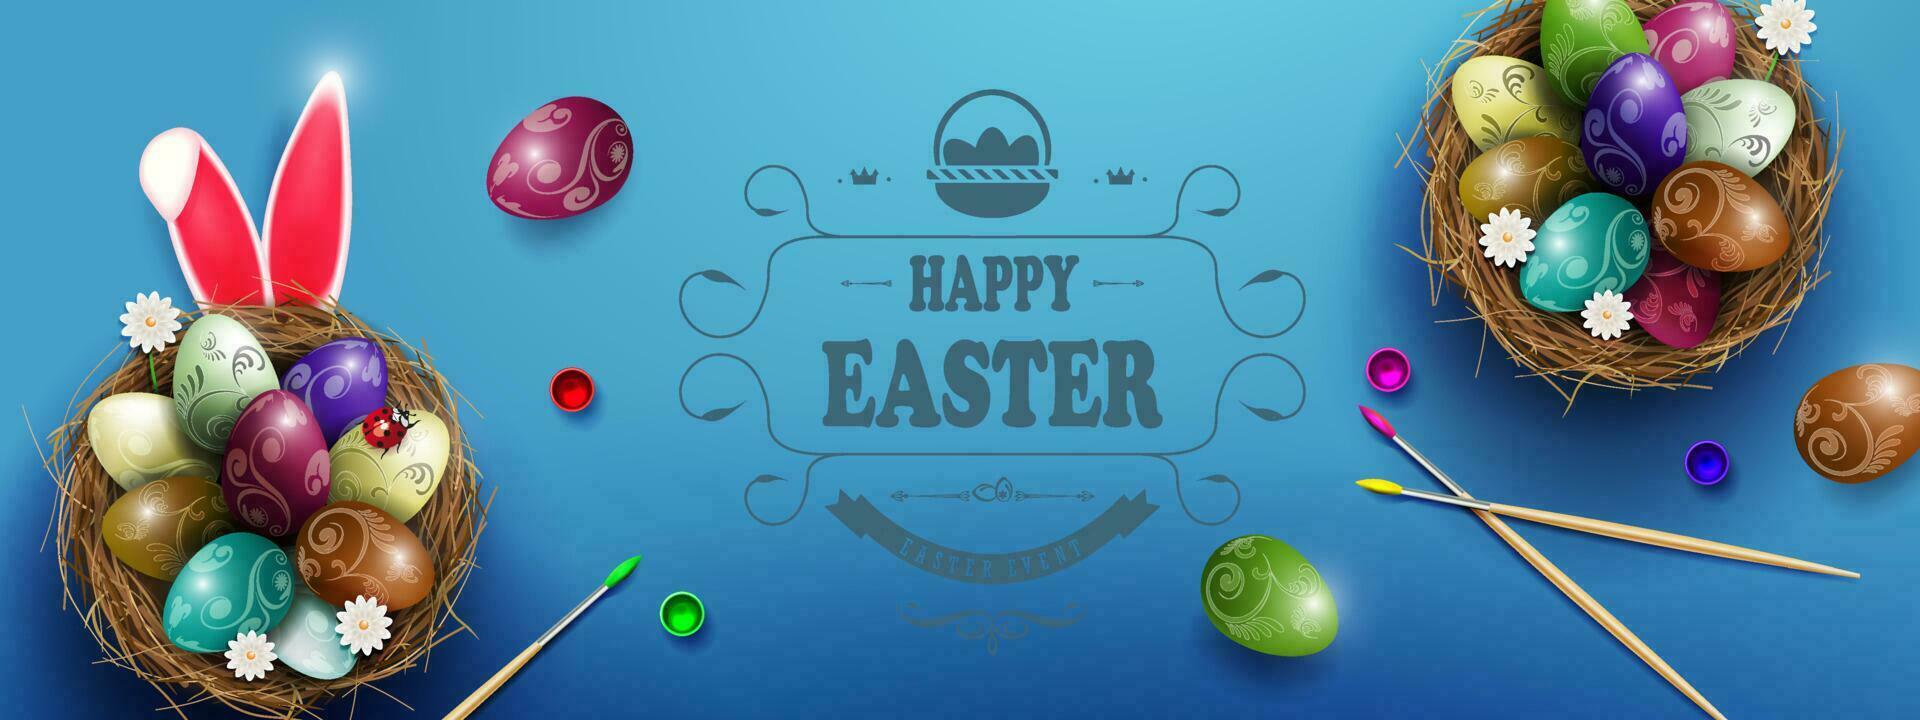 Blue postcard with Easter eggs and flowers in the nest, rabbit ears. vector